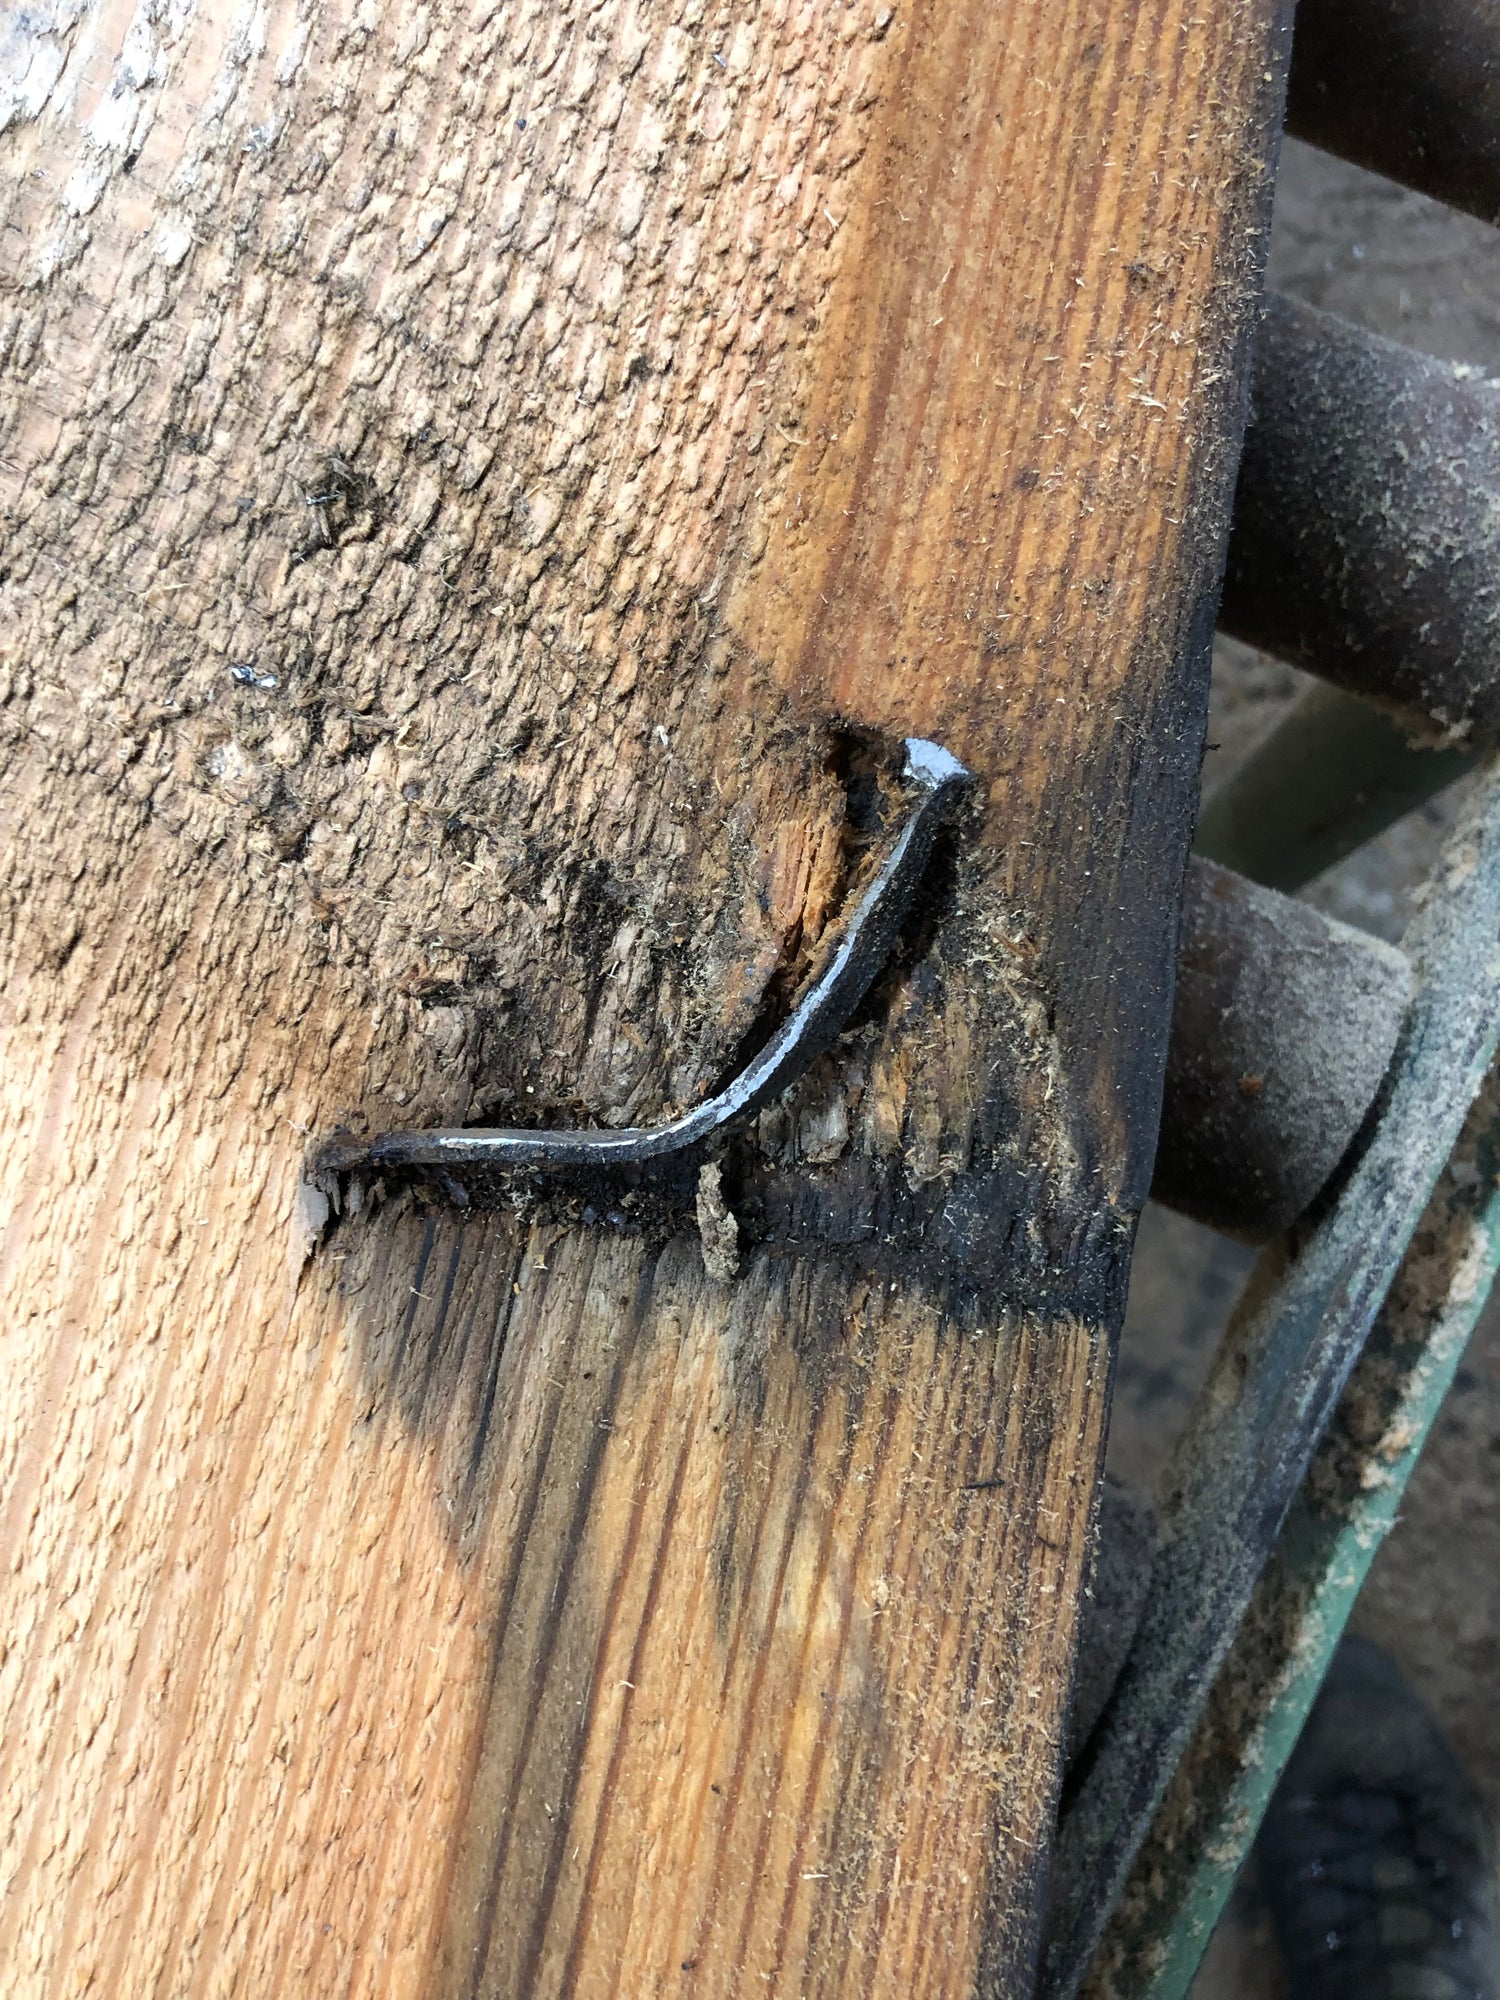 Nail to be removed from pitch pine beam before flooring is made